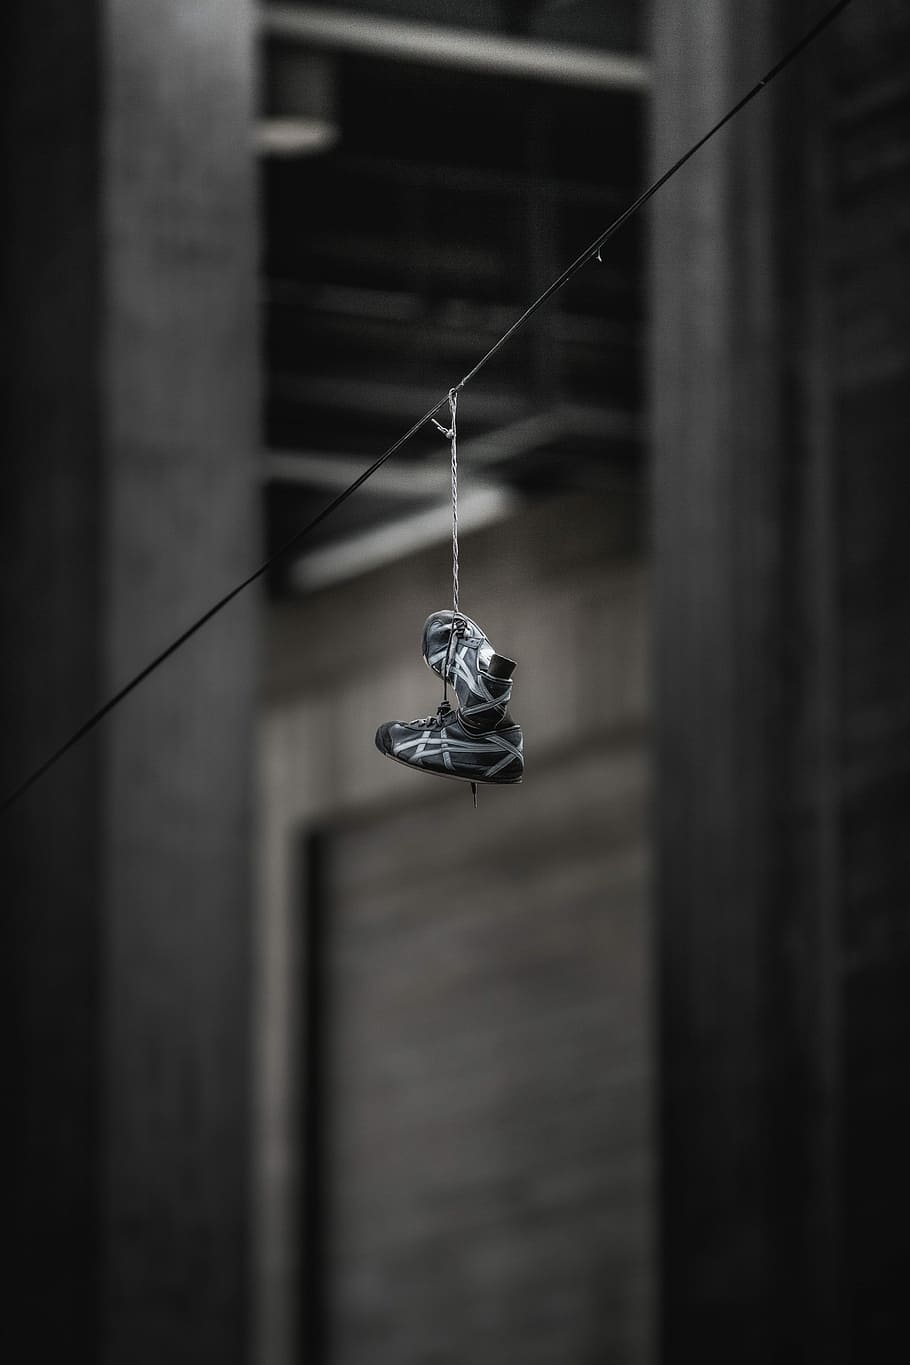 pair of black-and-gray ASICS shoes hanging on wire, pair of gray-and-white running shoes, HD wallpaper